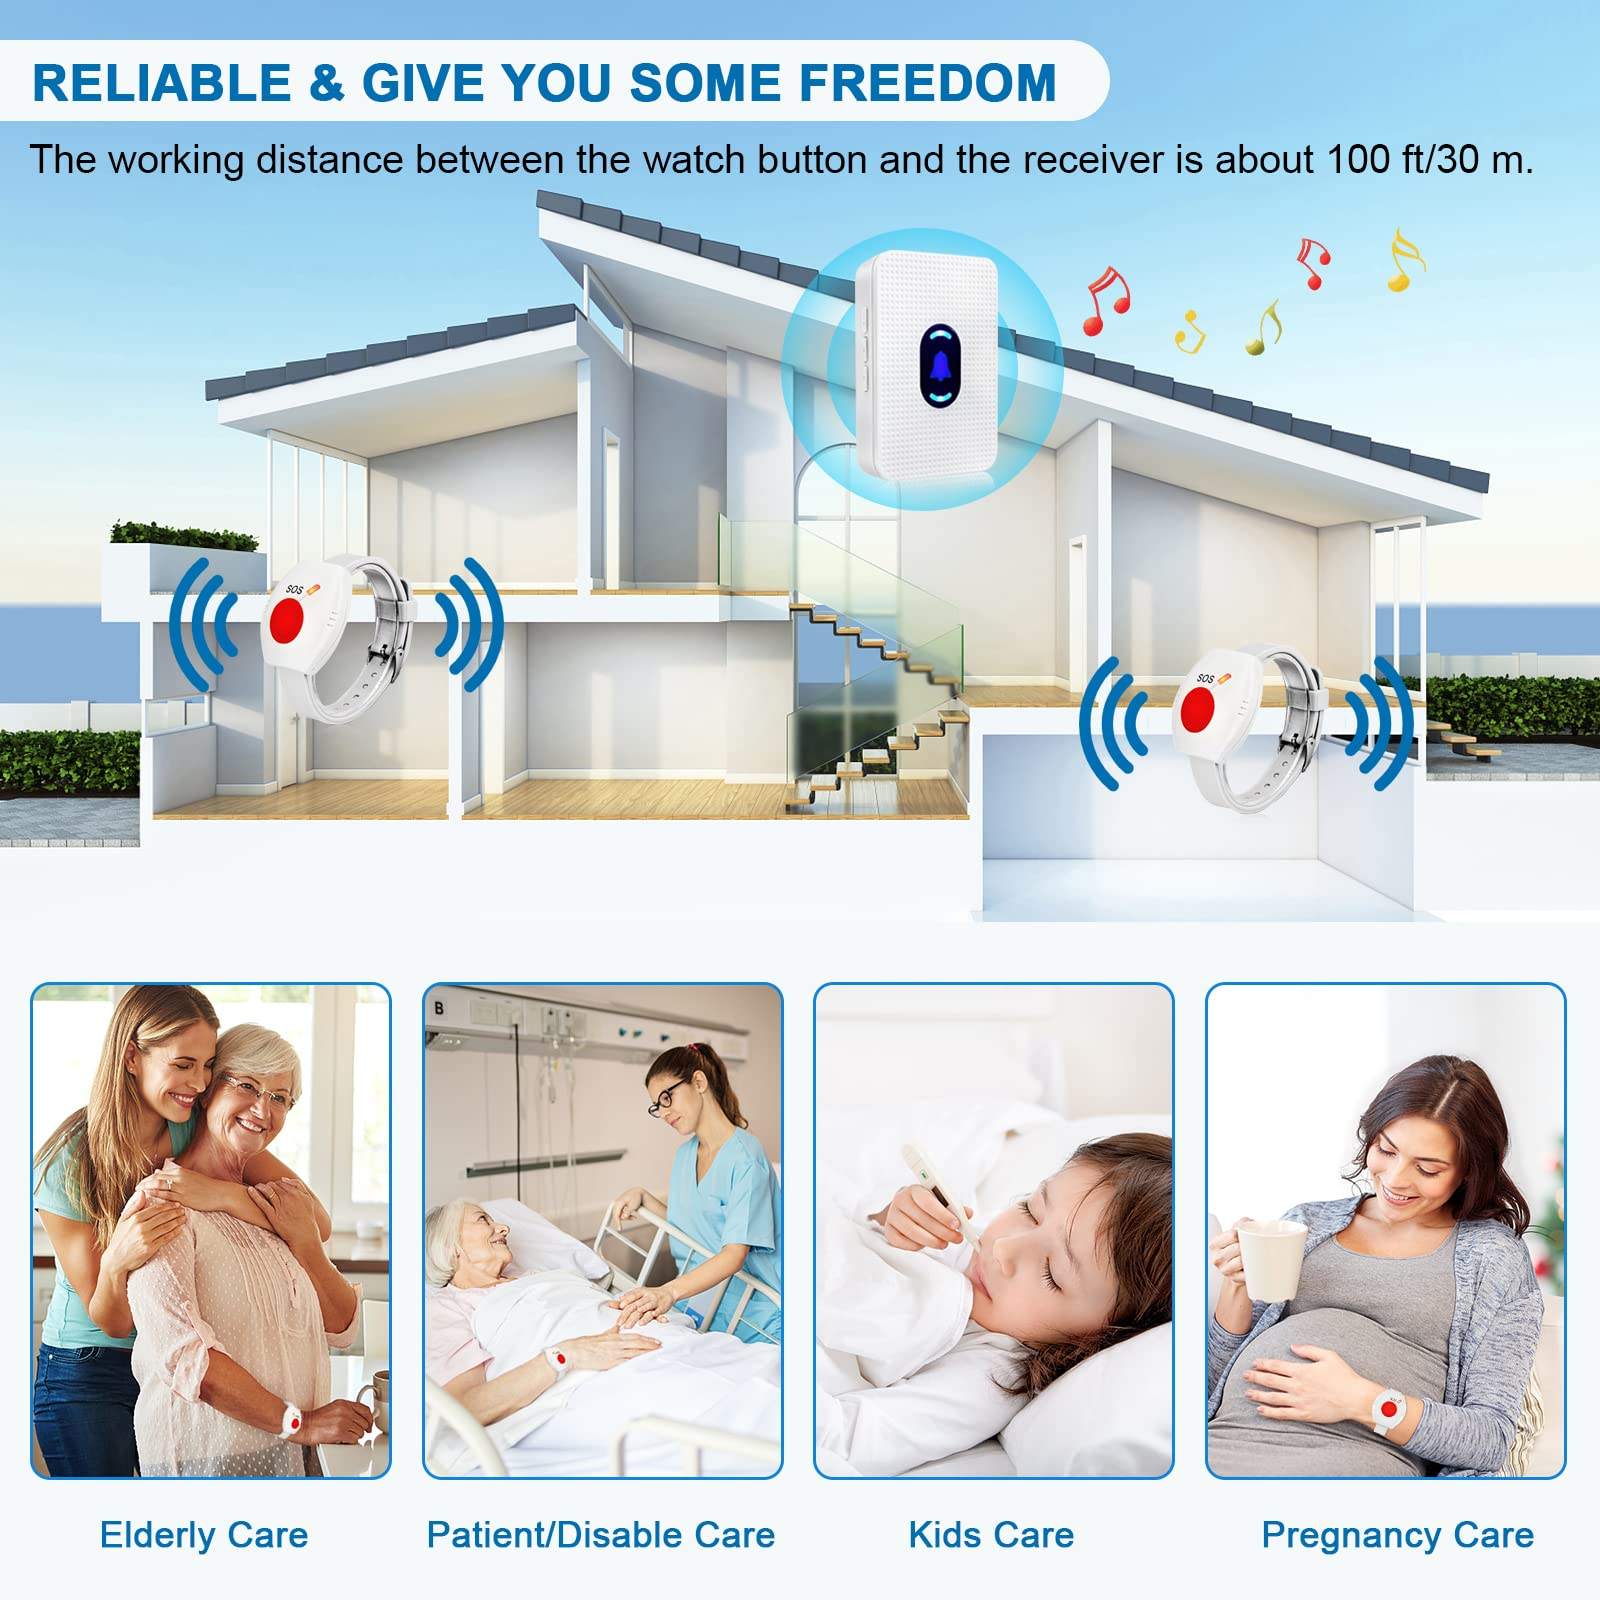 Daytech Newest Security Alarm Wireless Pager System Outdoor Wireless Panic Button Siren Panic Button Elderly